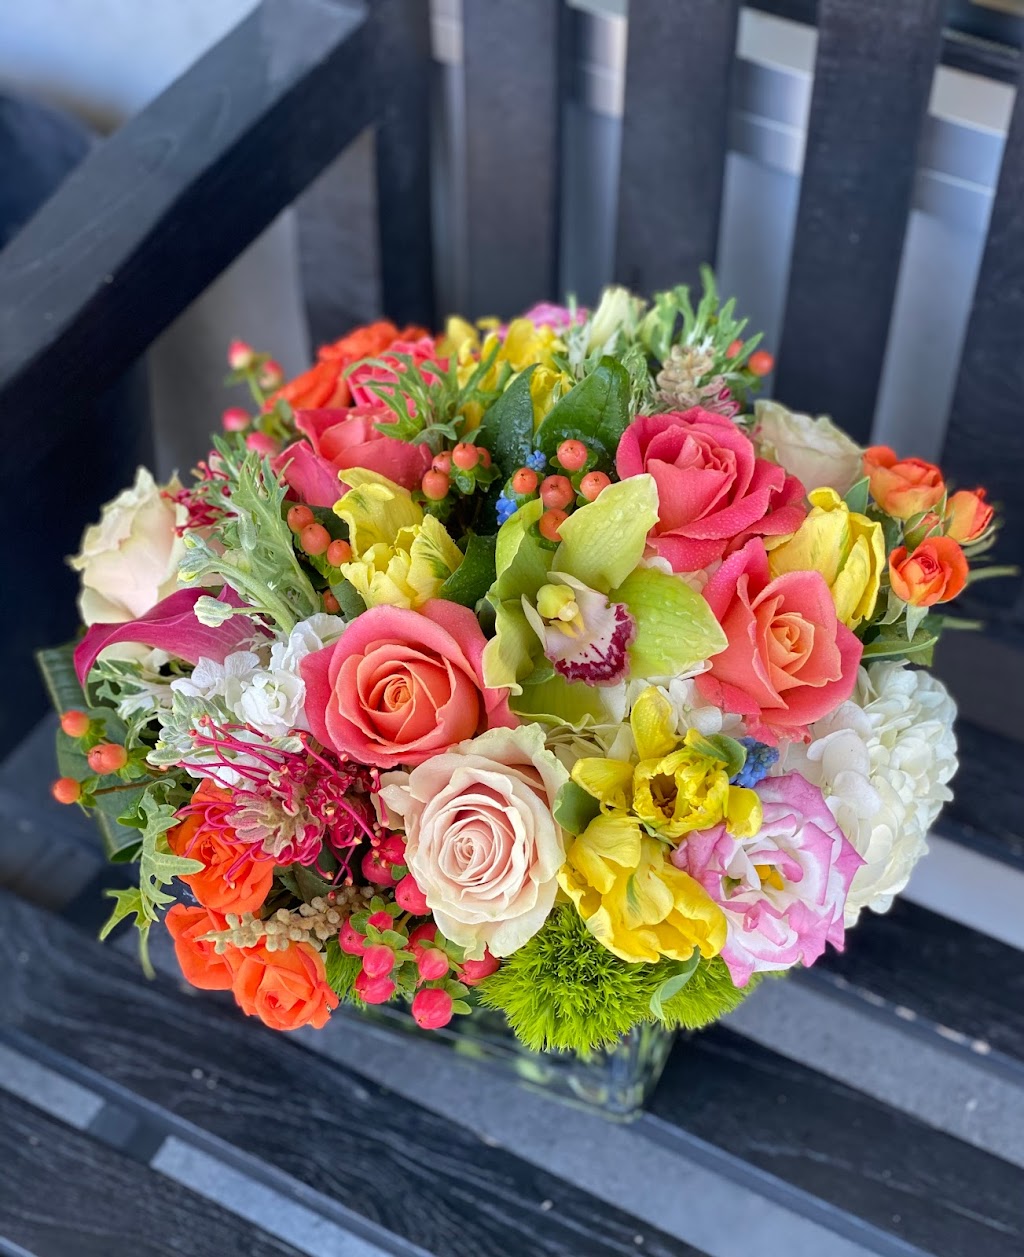 Colonial Village Flowers | 1497 Weaver St, Scarsdale, NY 10583 | Phone: (914) 723-2888